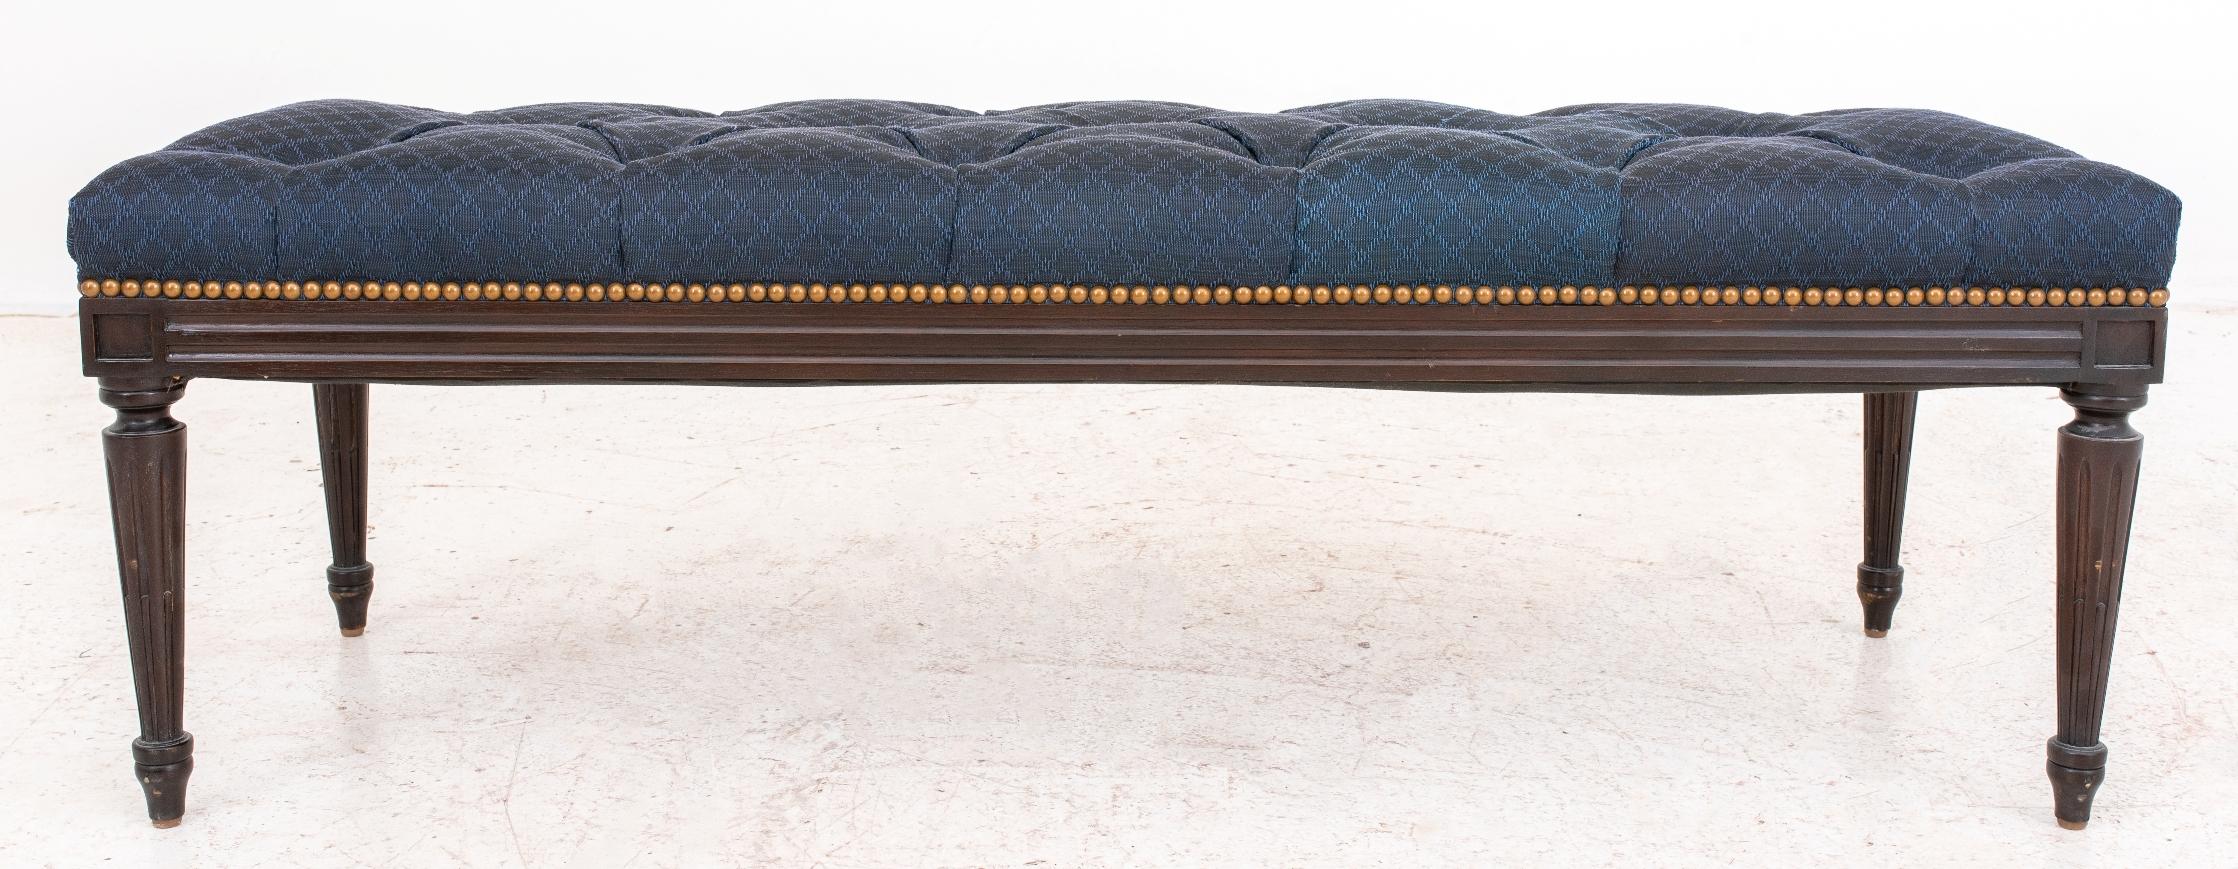 French Louis XVI style ebonized mahogany ottoman on bench, raised on fluted tapered legs, upholstered in blue jacquard fabric. Some fading visible on fabric. In good vintage condition. Wear consistent with age and use.

Dimensions: 15.5